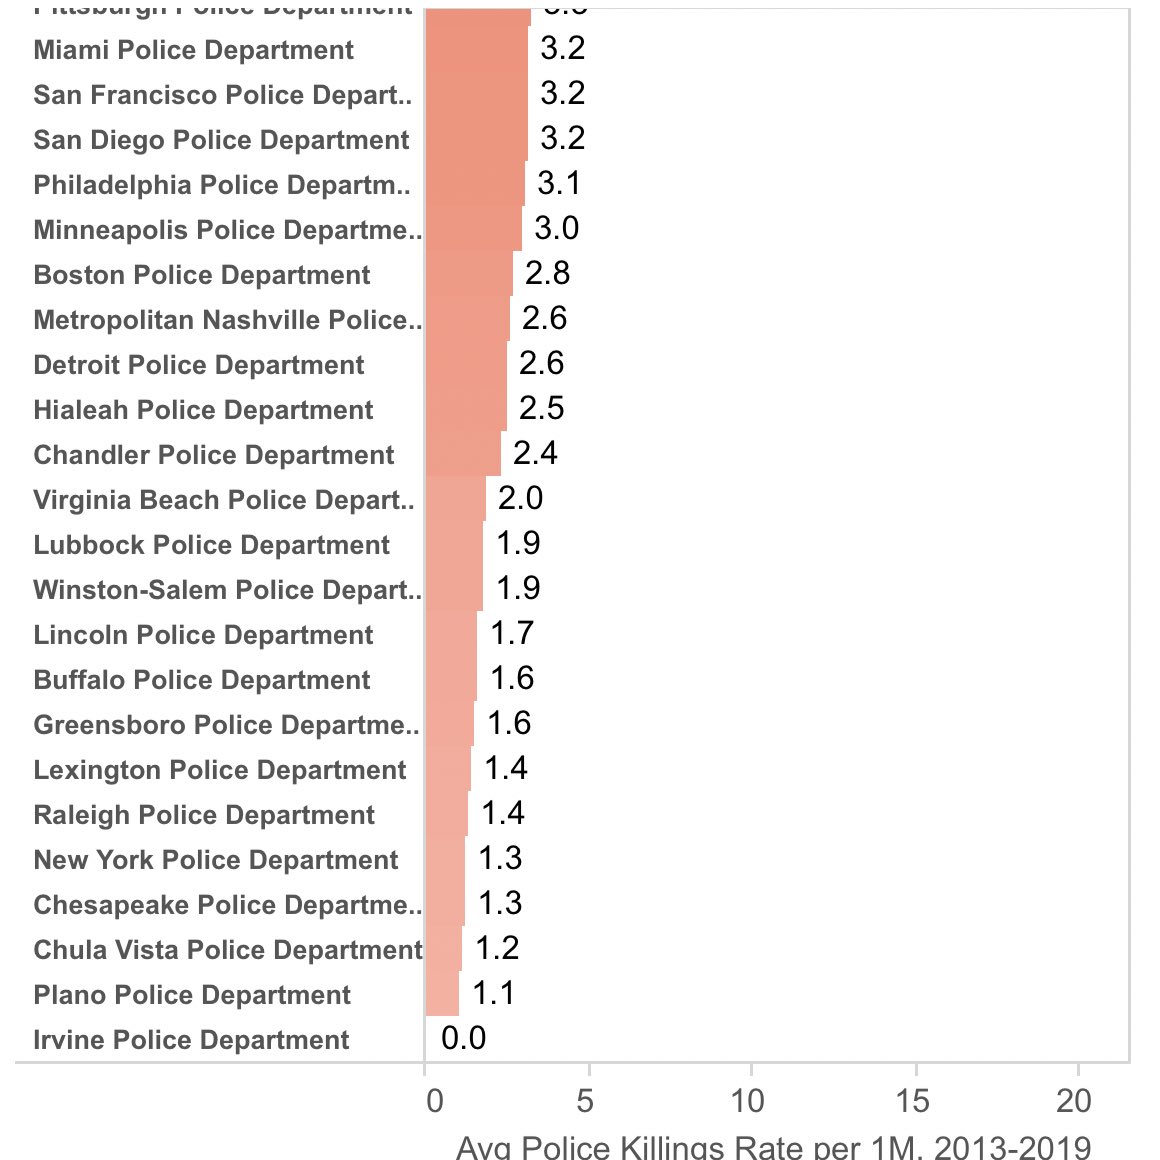 When we break down the data by city, there are massive differences in police violence rates per population. St Louis, OKC and Orlando consistently have the highest rates of police violence. Killings are 3x less frequent in SF or Philly, 4x less in Detroit.  http://mappingpoliceviolence.org/cities 